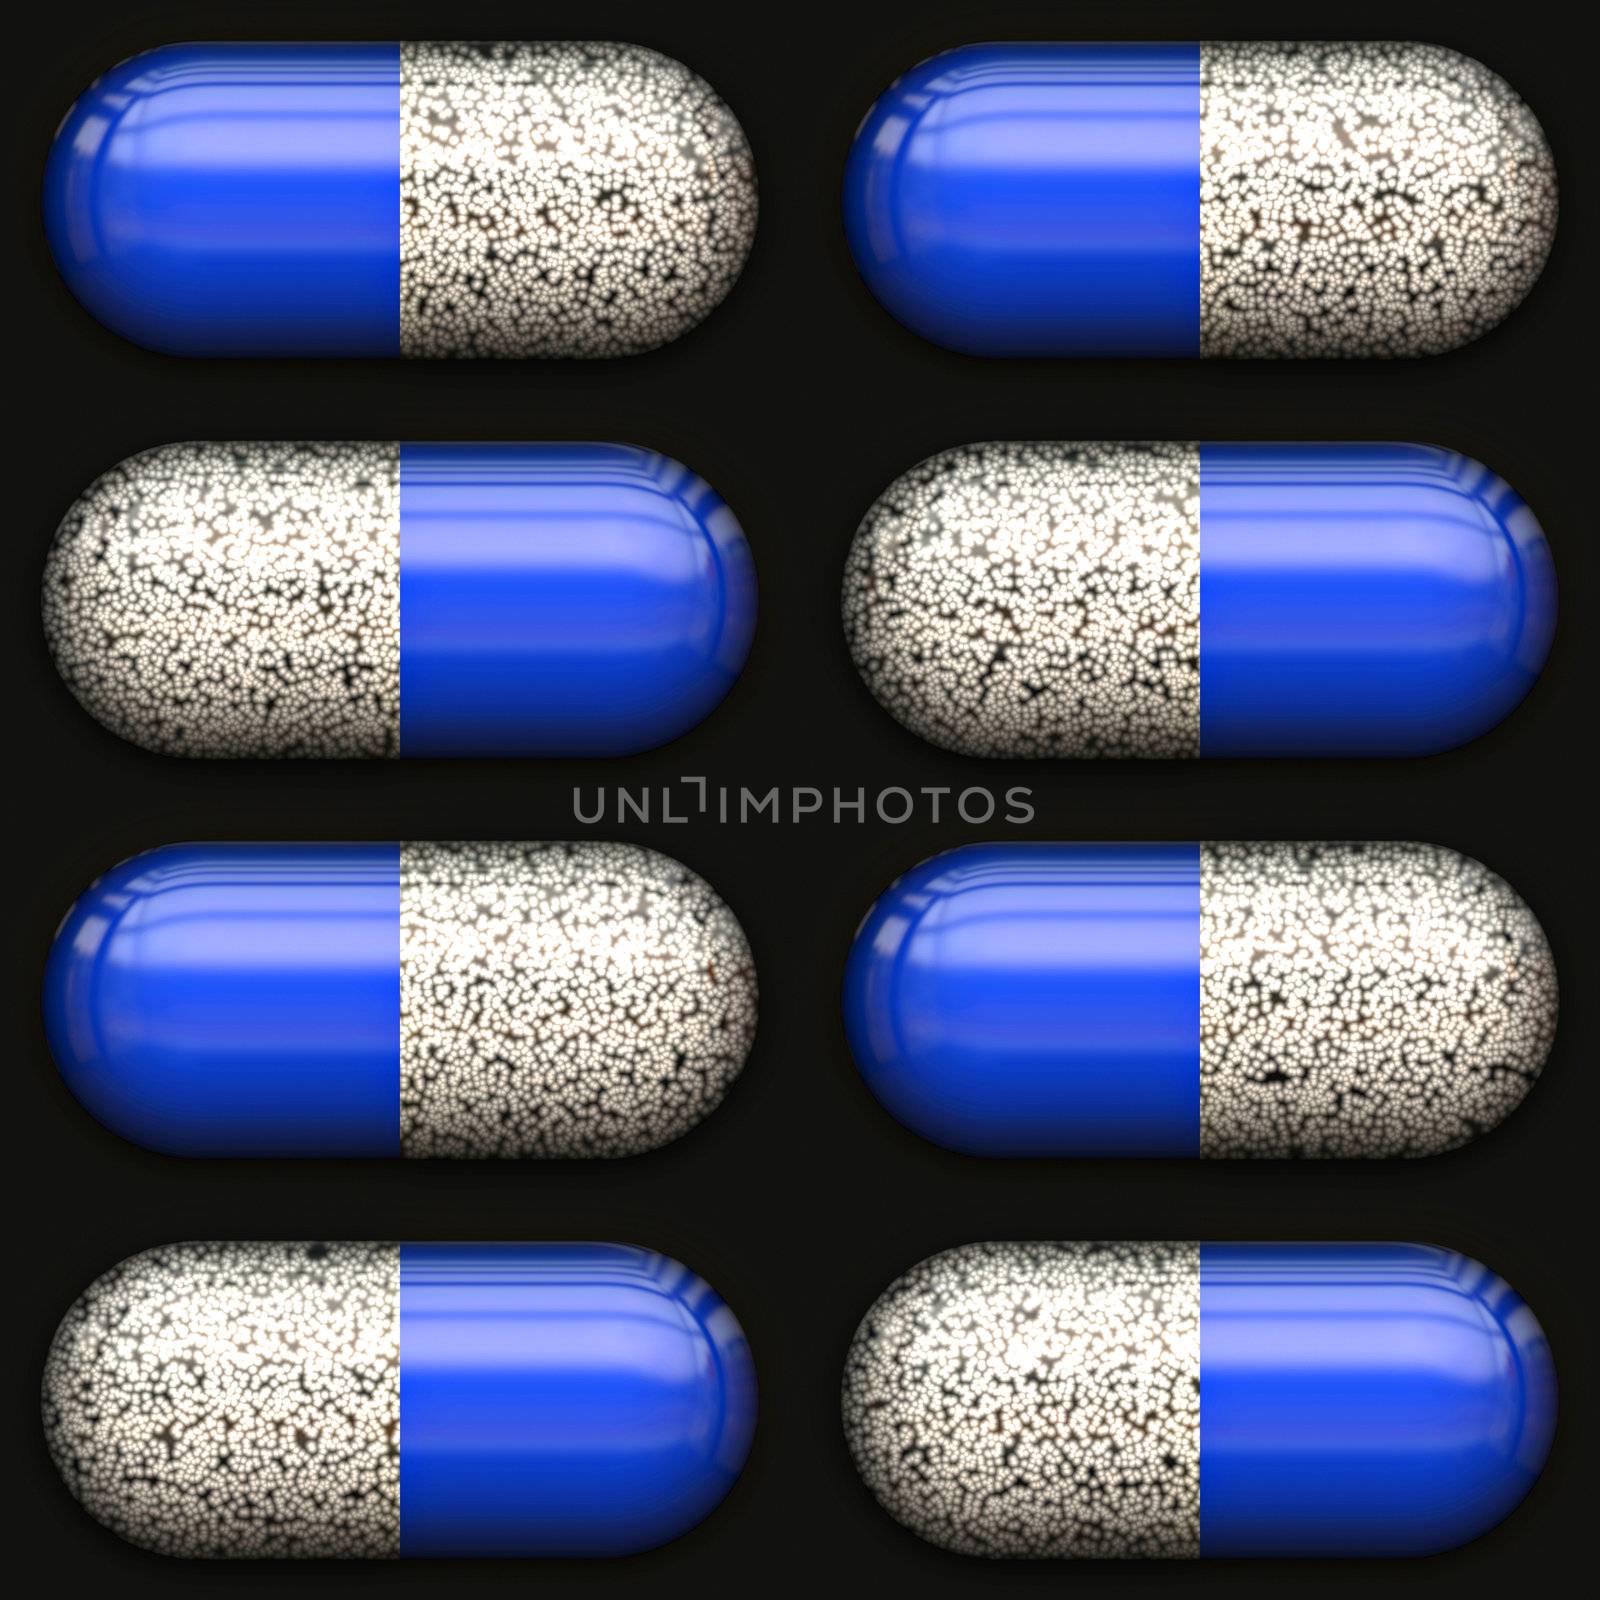 a large image of lots of pills or capsules in rows